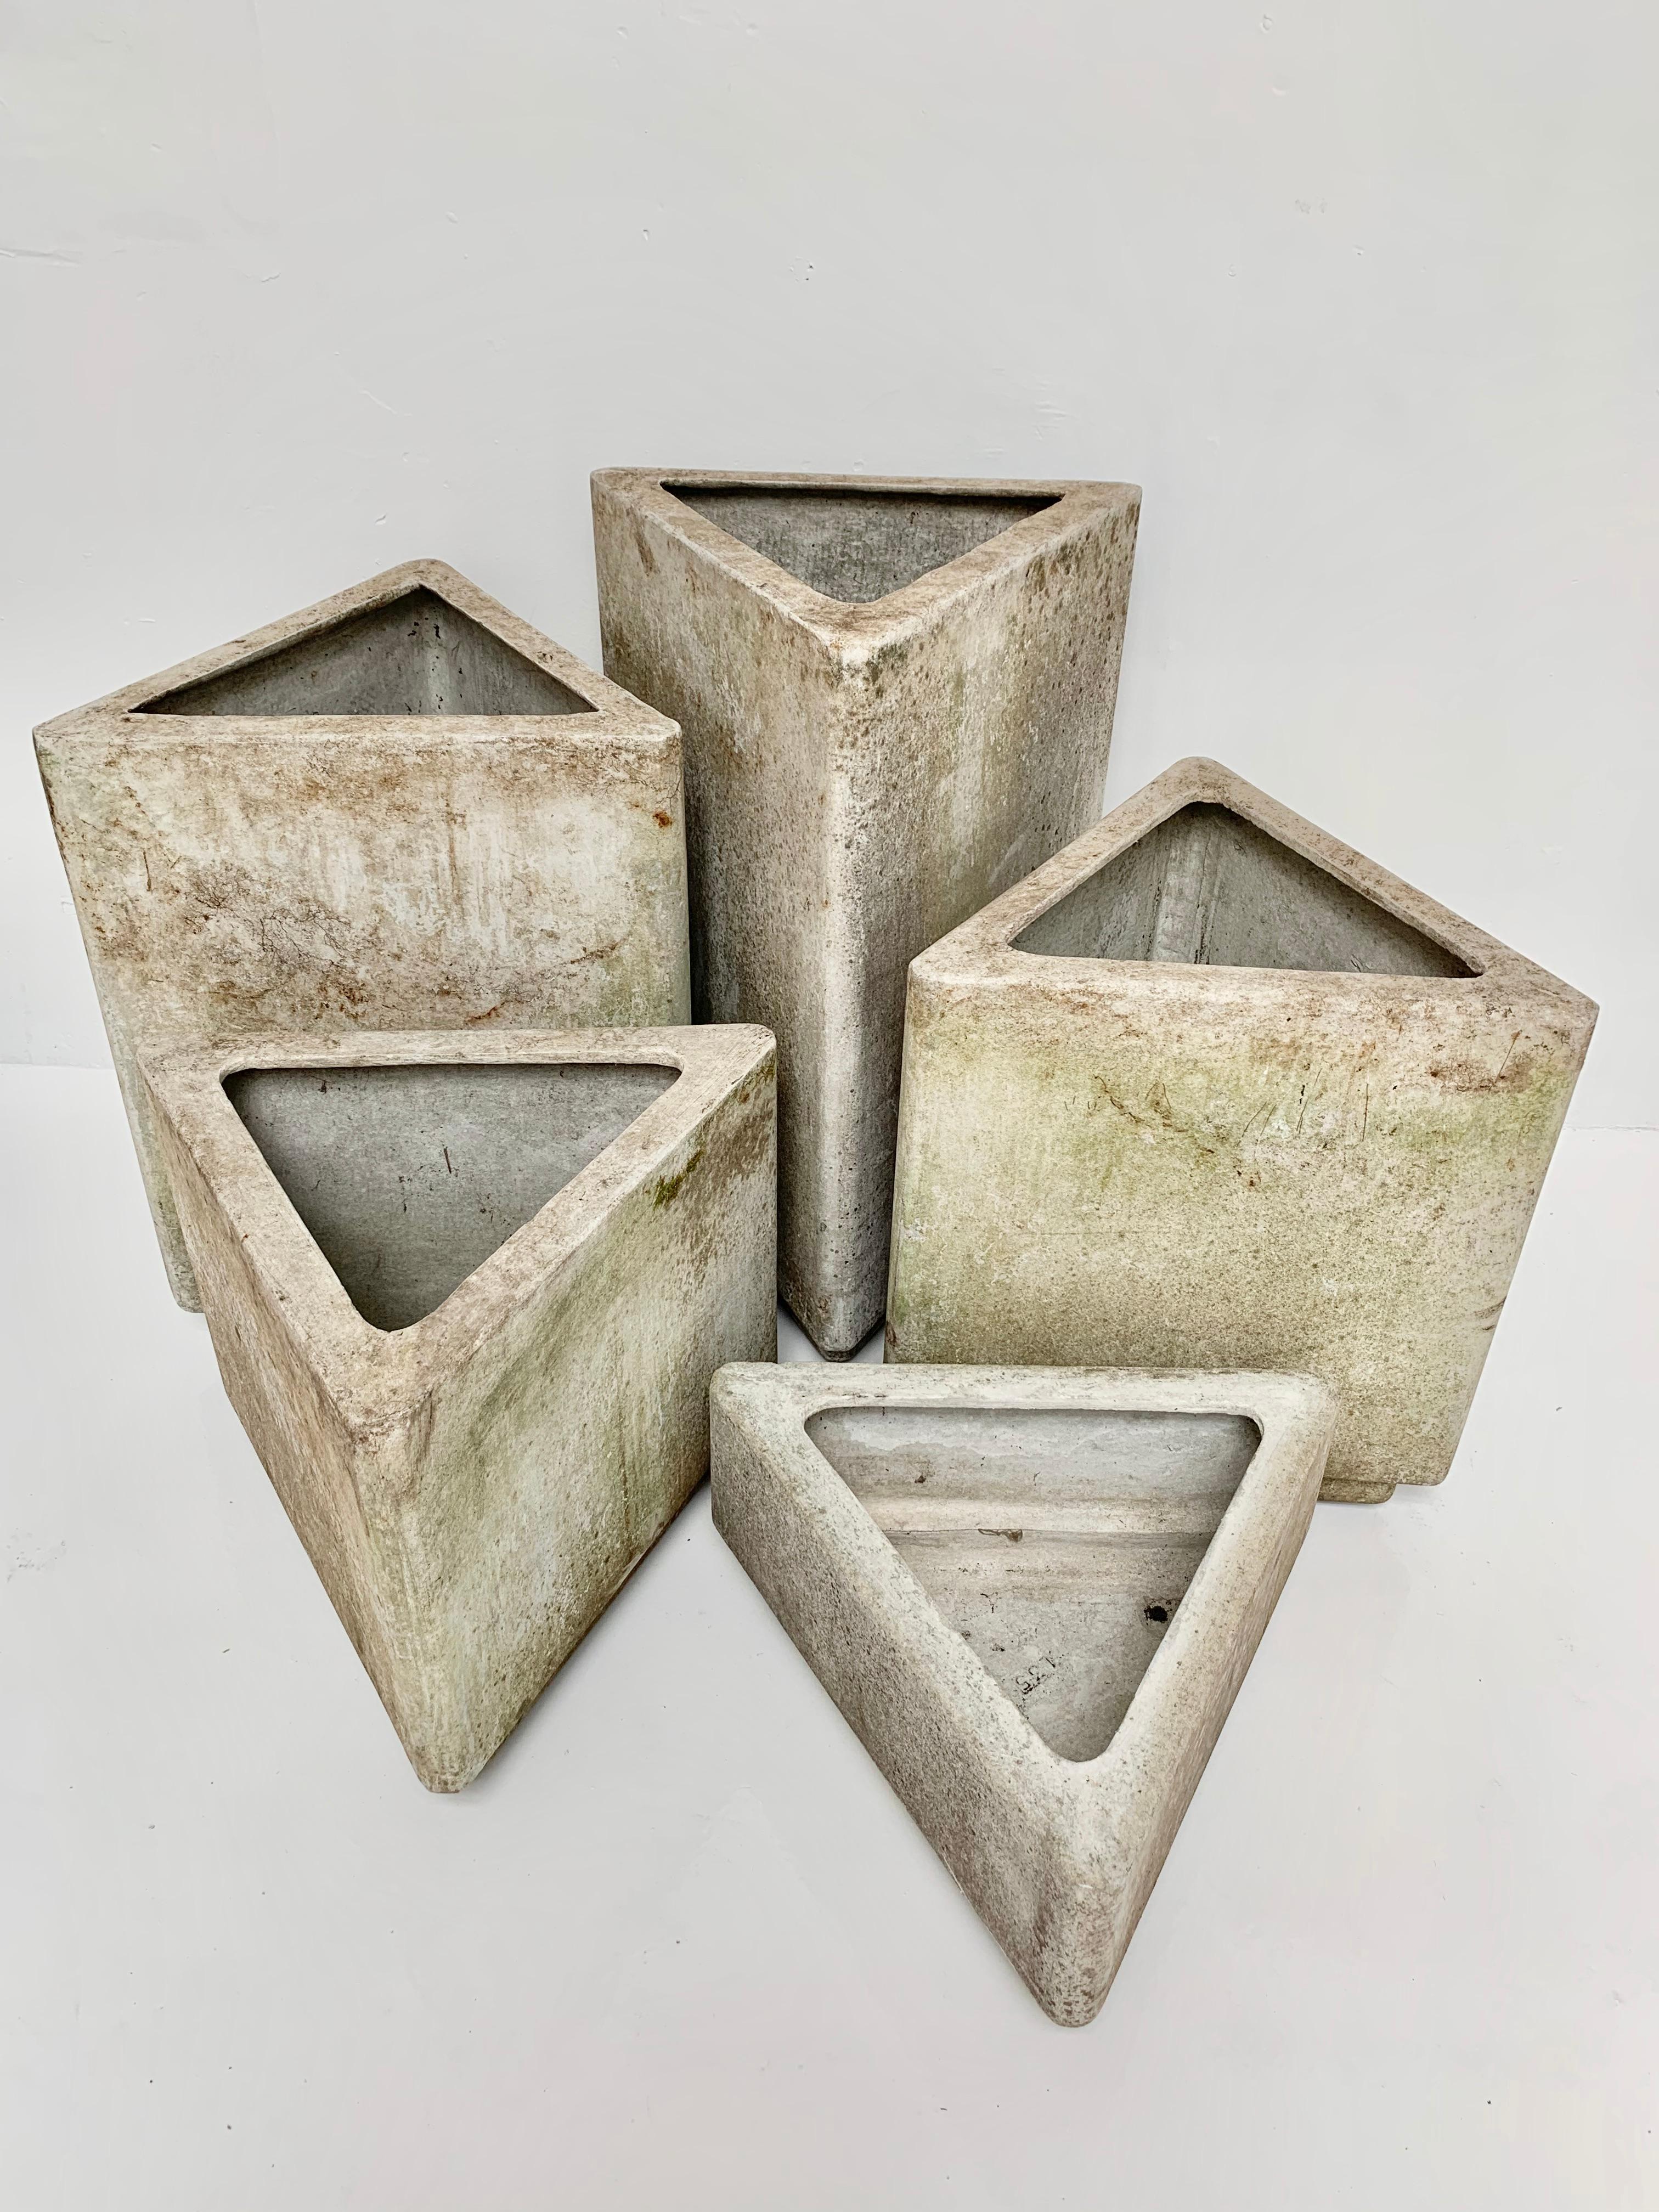 Important set of triangular concrete planters by Swiss Architect Willy Guhl. Only set on the planet for sale. 5 triangles of variable heights, with the same depth and width. Pieces can be arranged in a multitude of ways. Each triangle sits atop